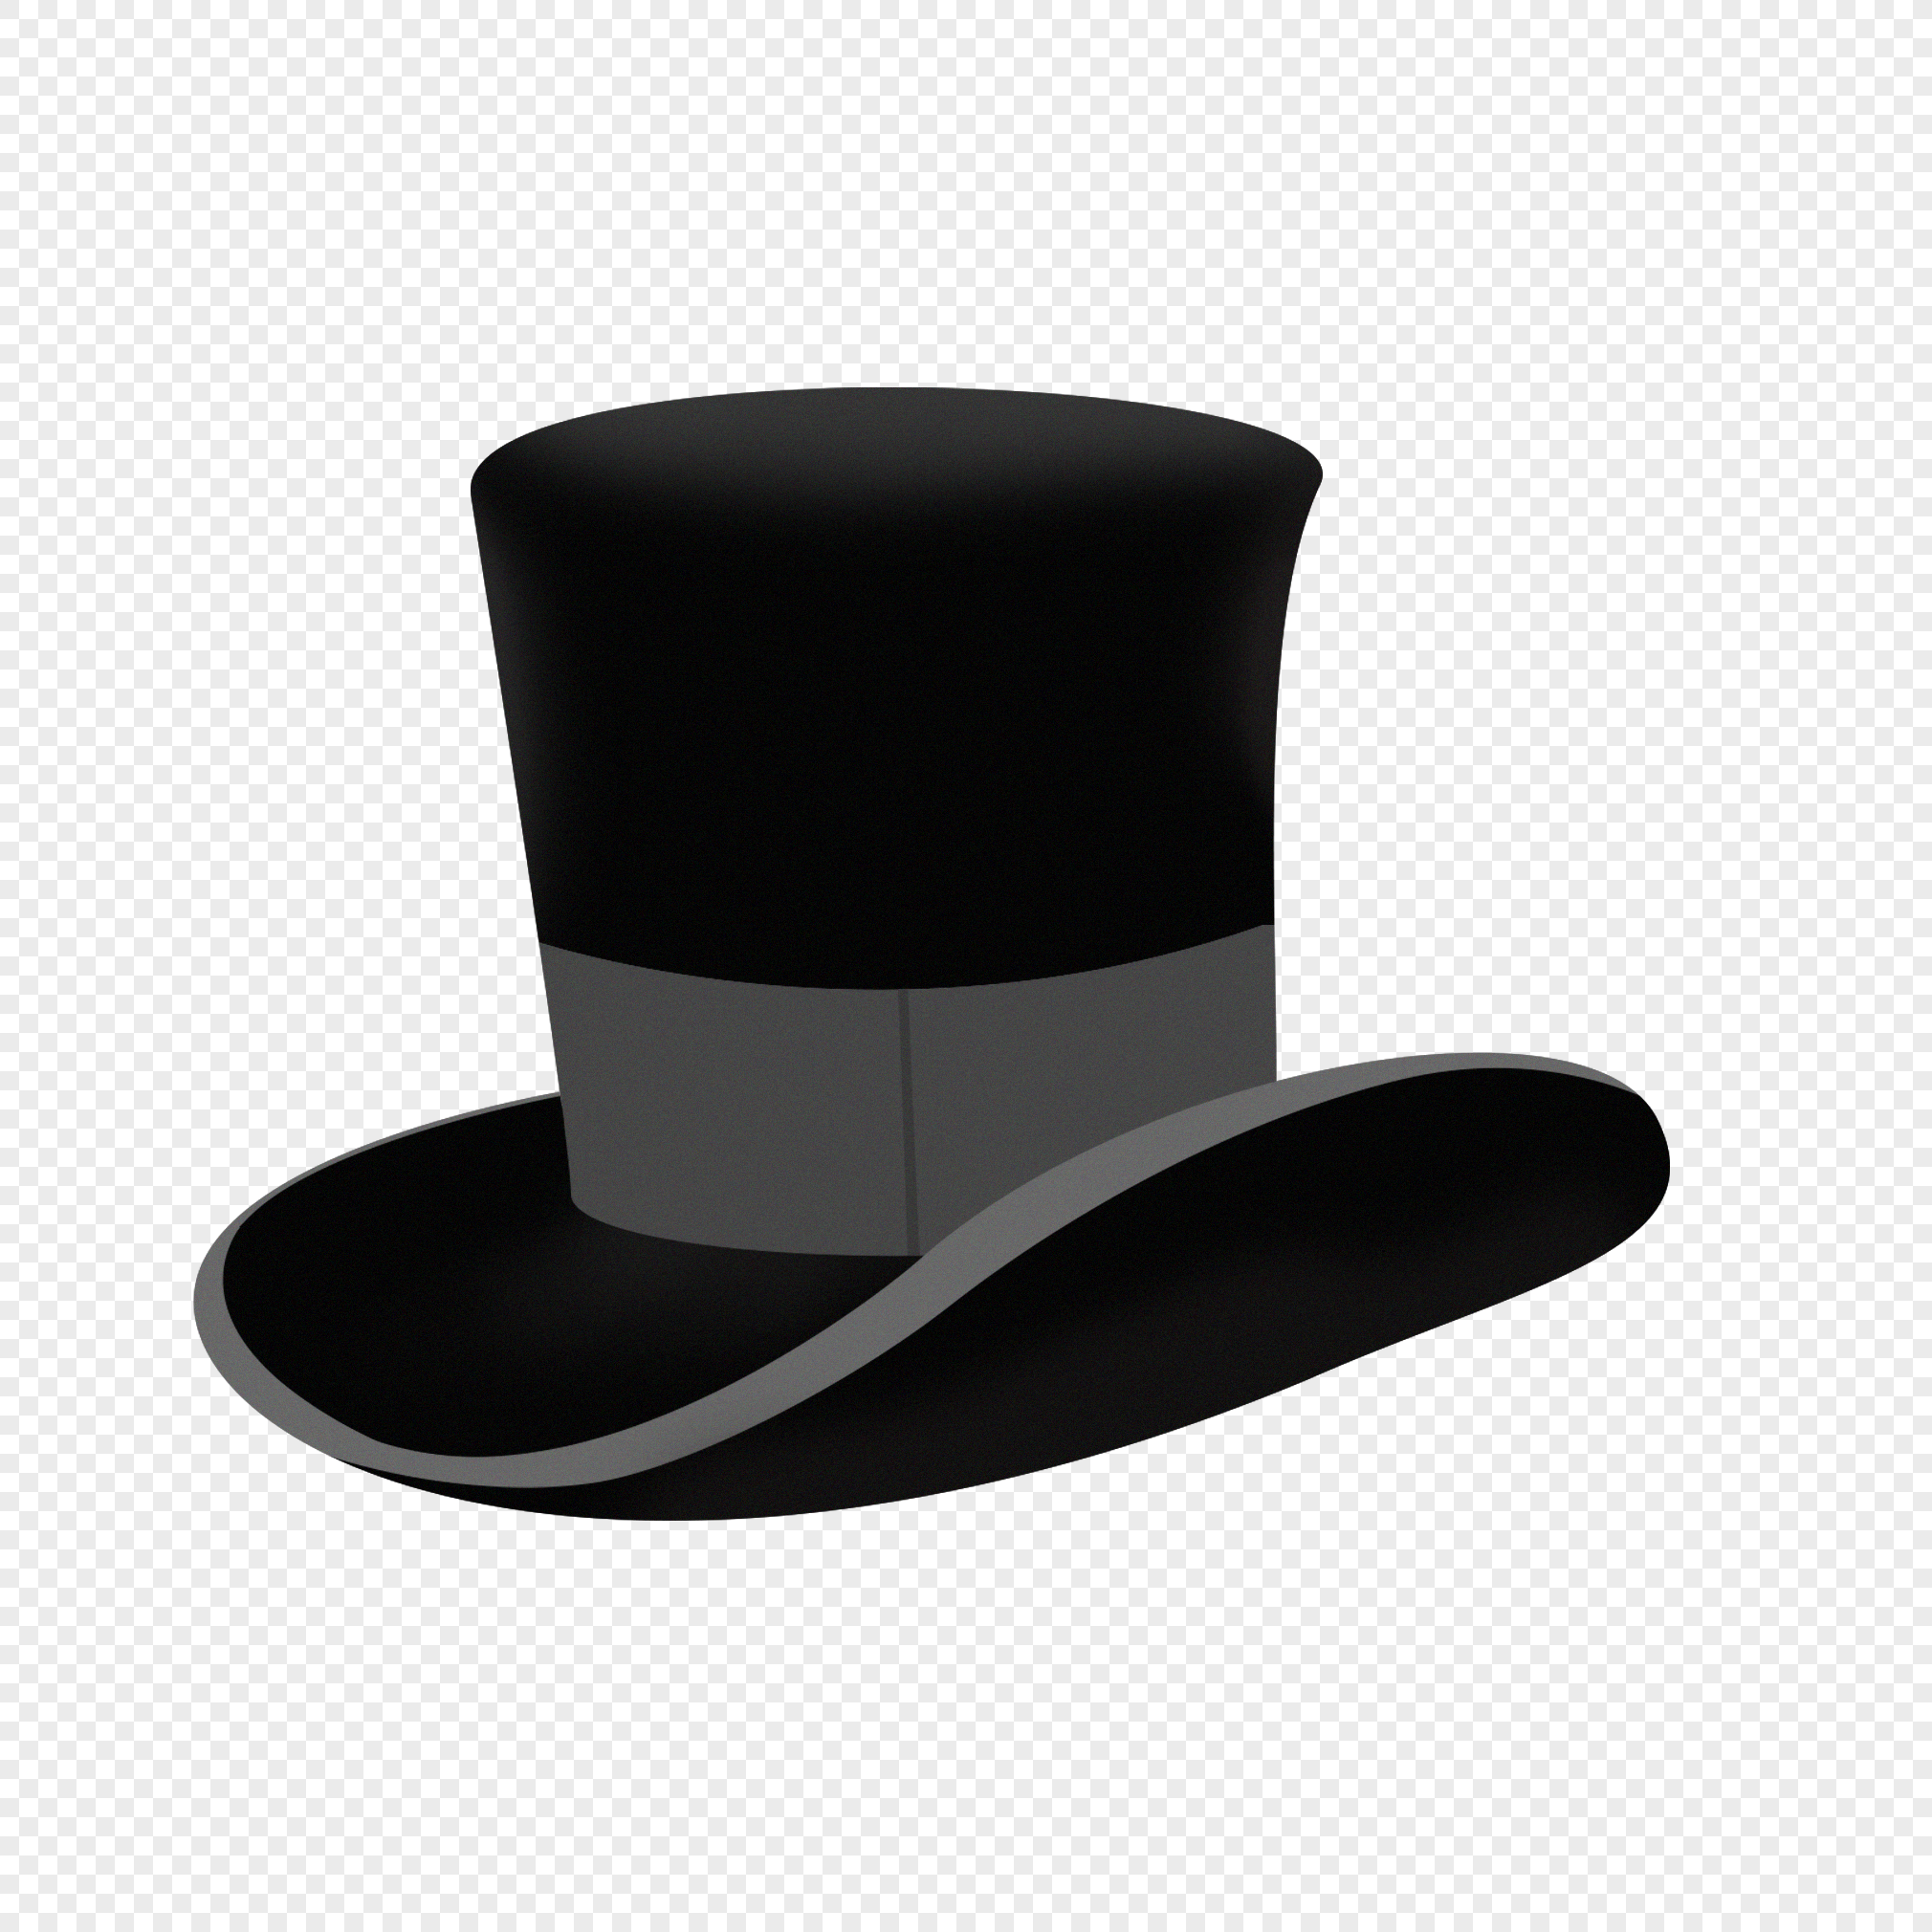 Hat PNG Images With Transparent Background | Free Download On Lovepik